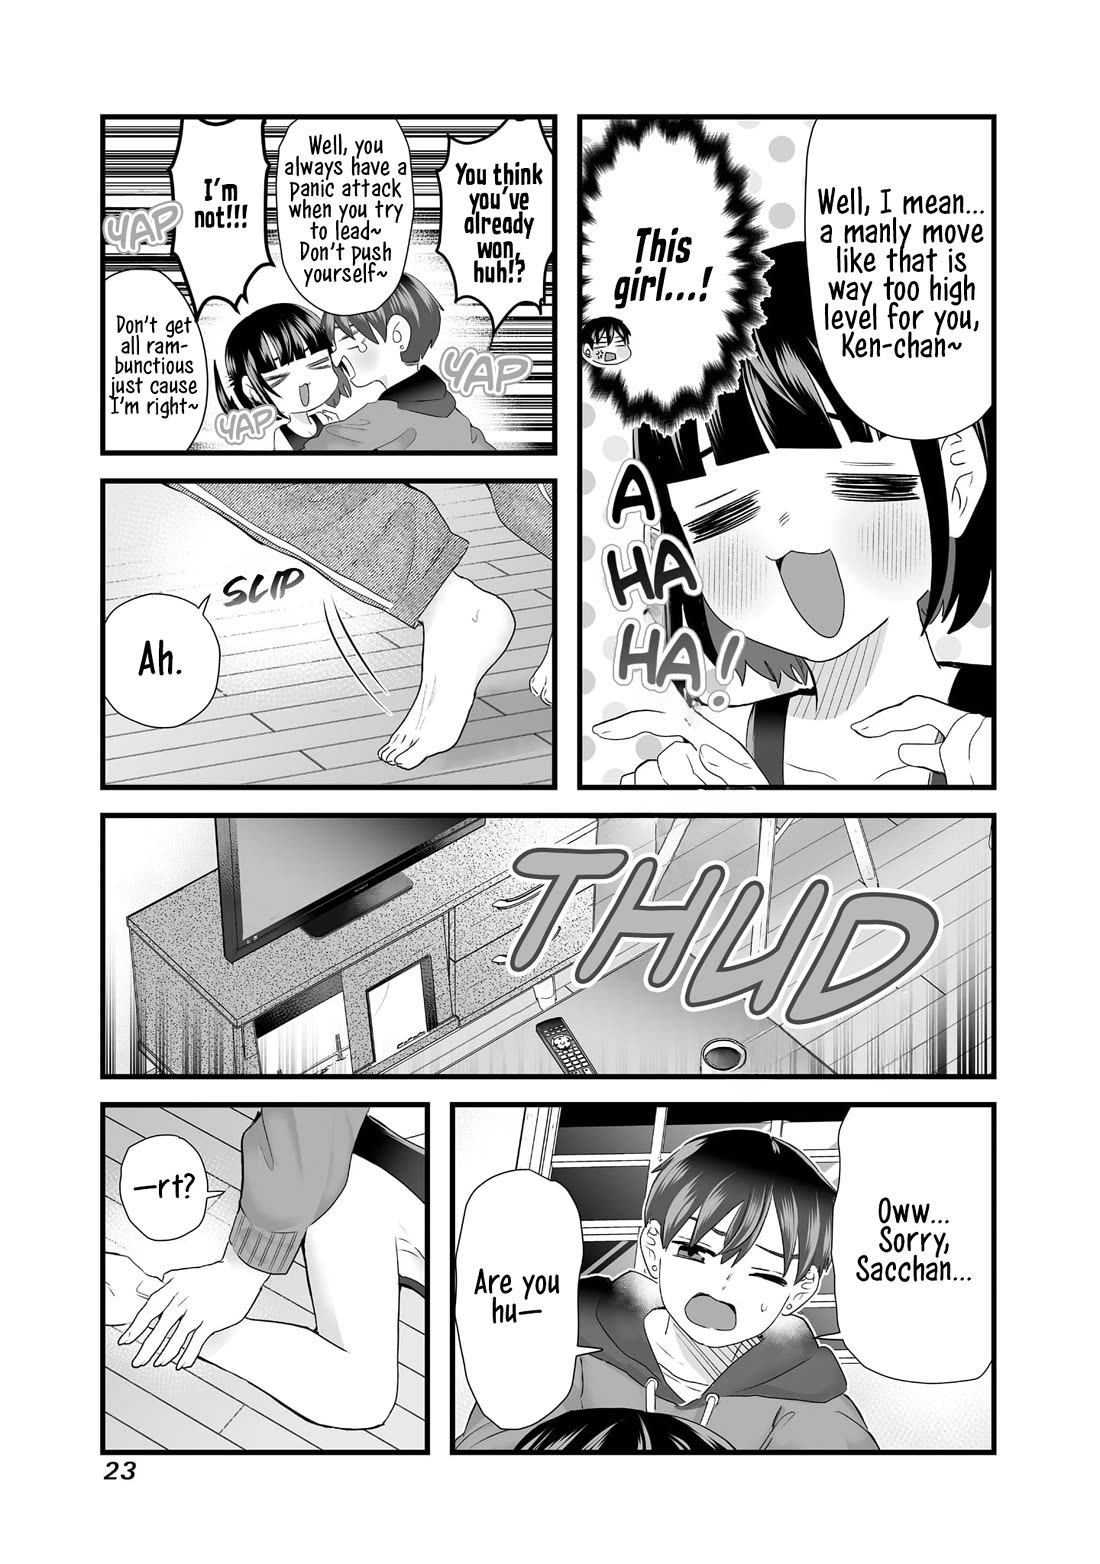 Sacchan and Ken-chan Are Going at it Again - chapter 3 - #3